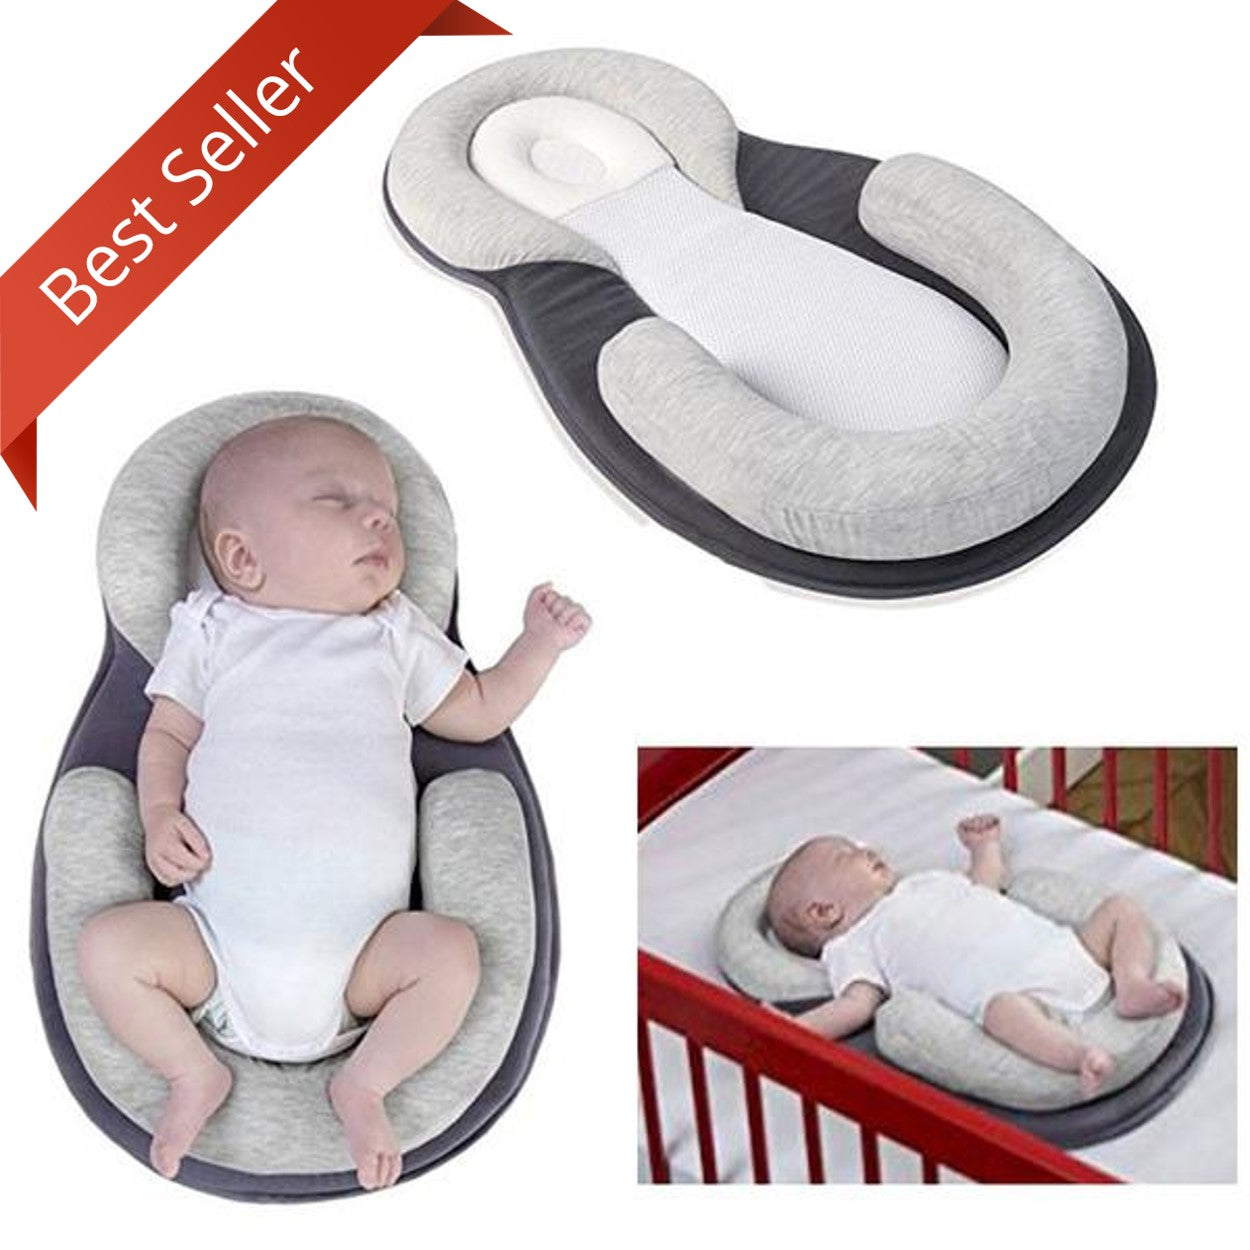 baby reflux pillows for sleeping